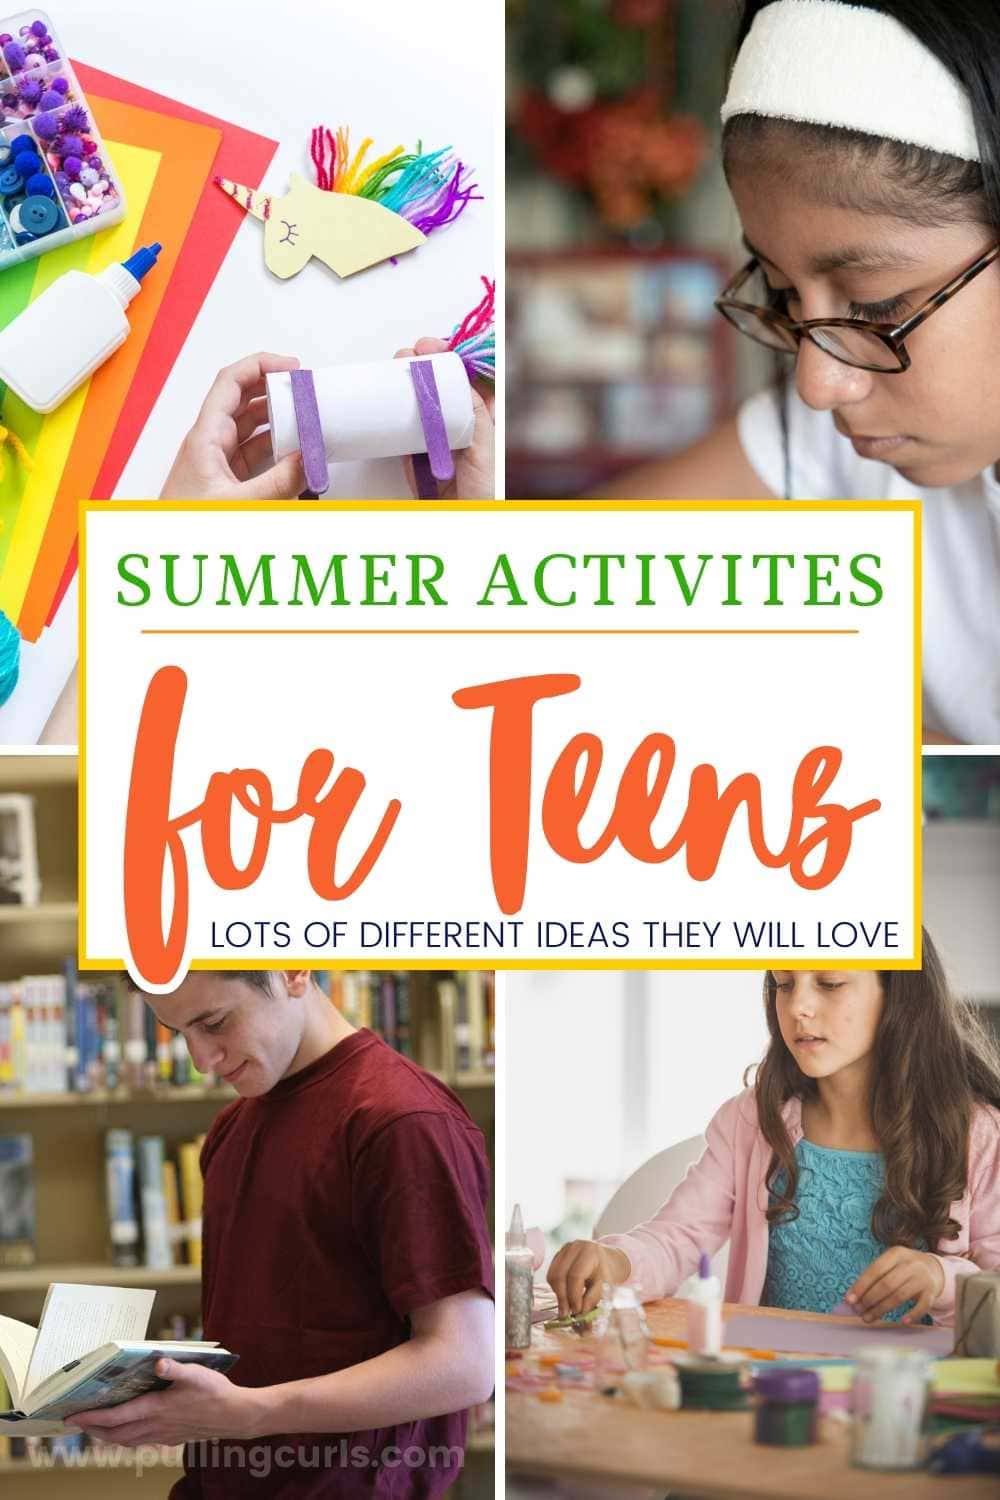 Kick off your teens' summer the right way with this bucket list of fun-filled activities that'll keep them off their screens and engaged with the world around them. From outdoor games like kickball and goodminton to DIY crafts from the comfort of their rooms, we've got you covered. You might even find yourself joining in! via @pullingcurls